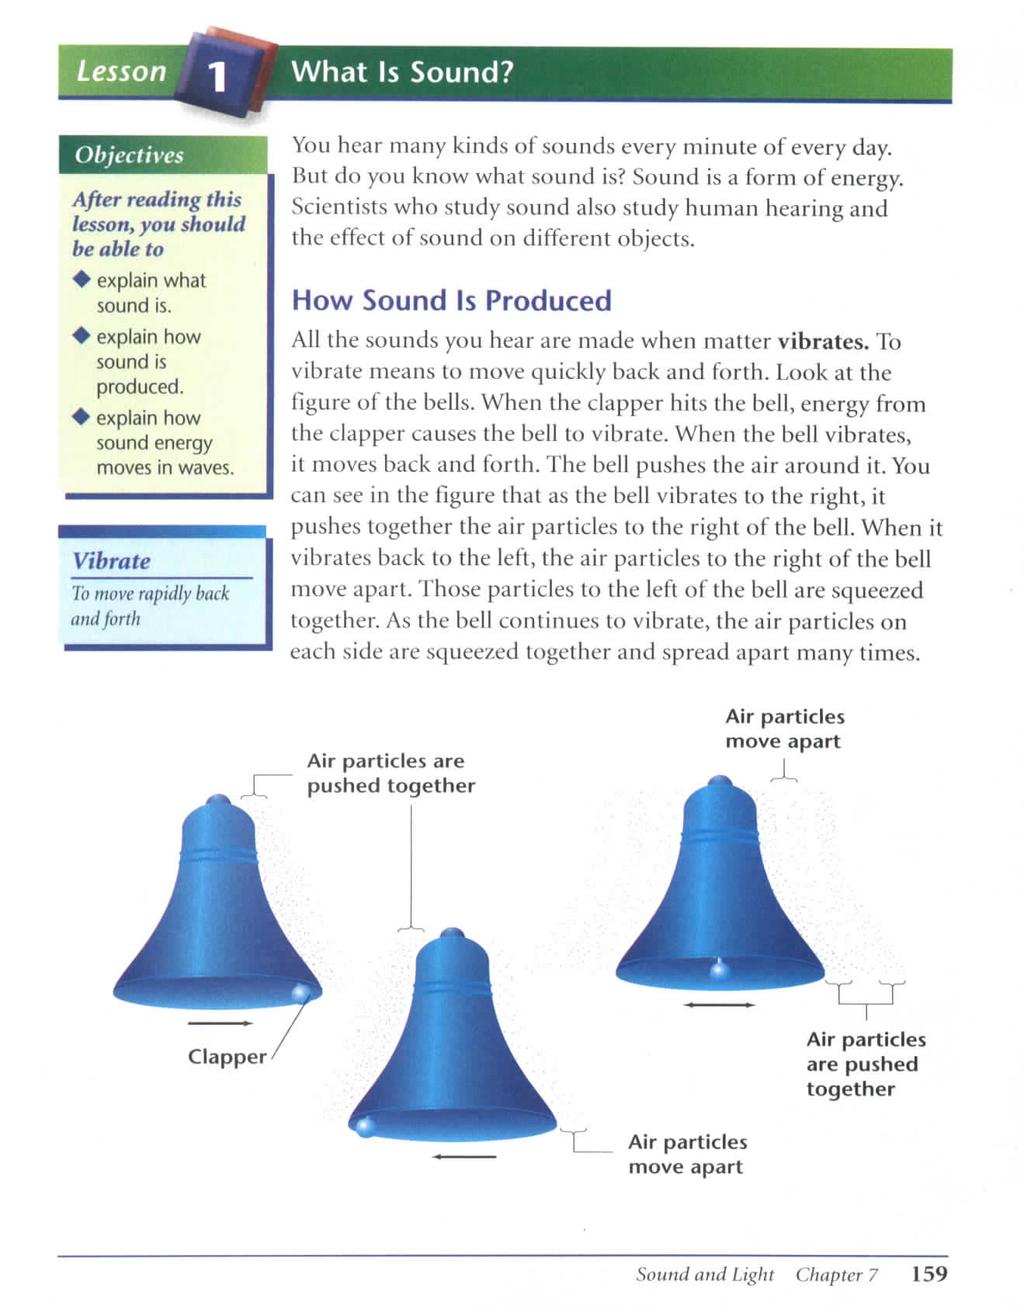 What Is Sound? Objectives After reading this lesson, you should be able to + explain what sound is. + explain how sound is produced. + explain how sound energy moves in waves.